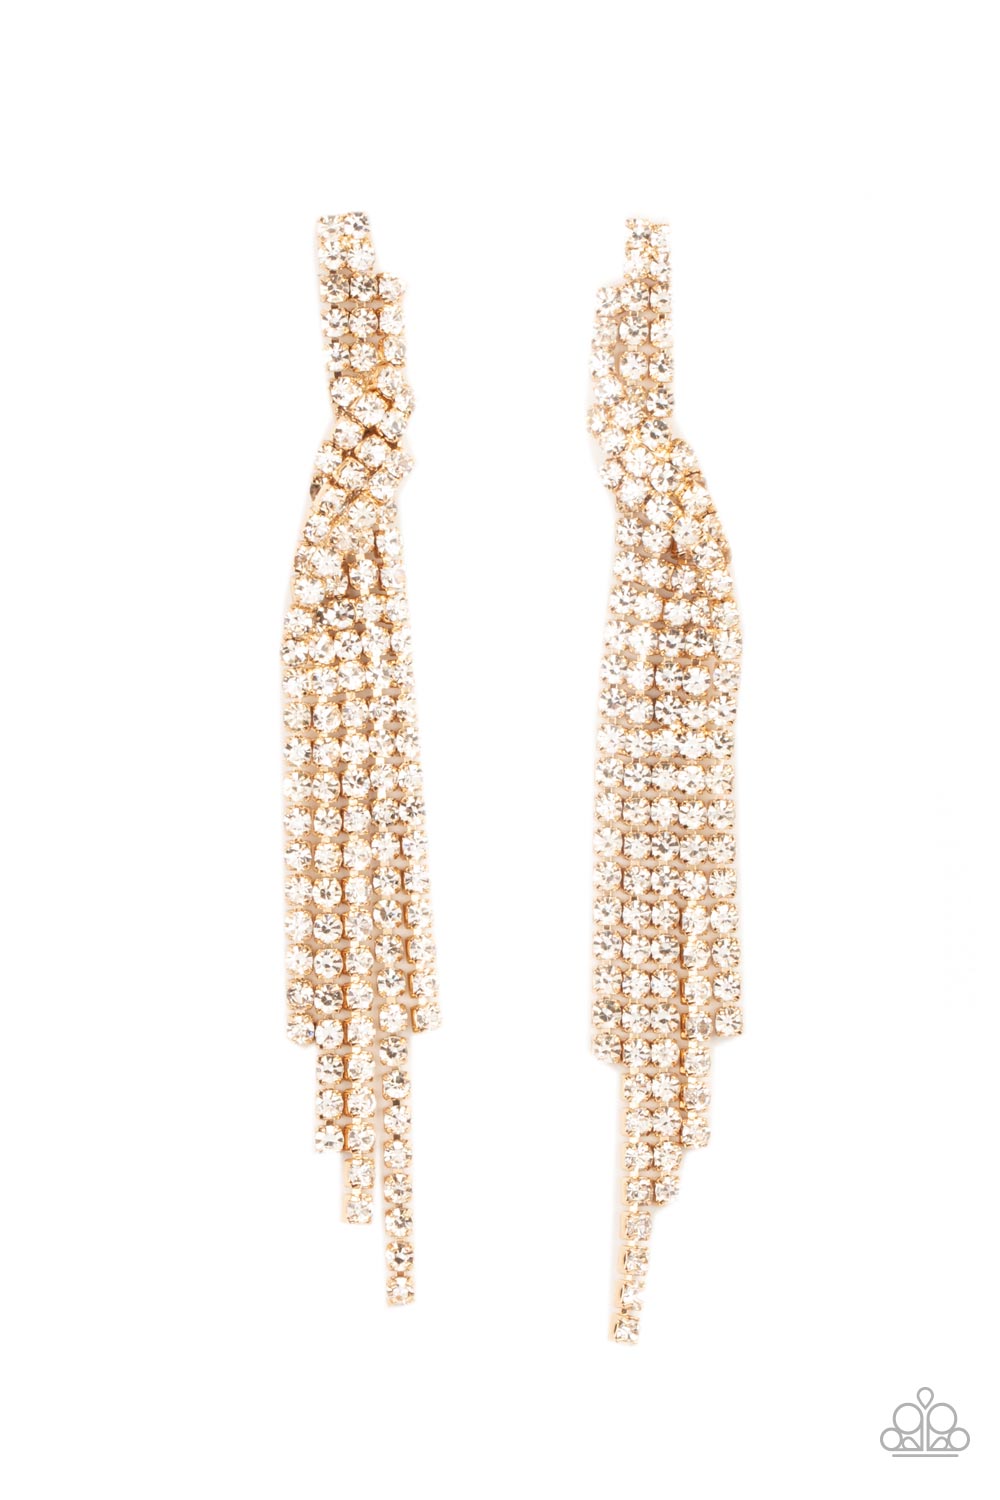 Cosmic Candescence Gold and White Rhinestone Earrings - Paparazzi Accessories Life of the Party Exclusive November 2021 - lightbox -CarasShop.com - $5 Jewelry by Cara Jewels